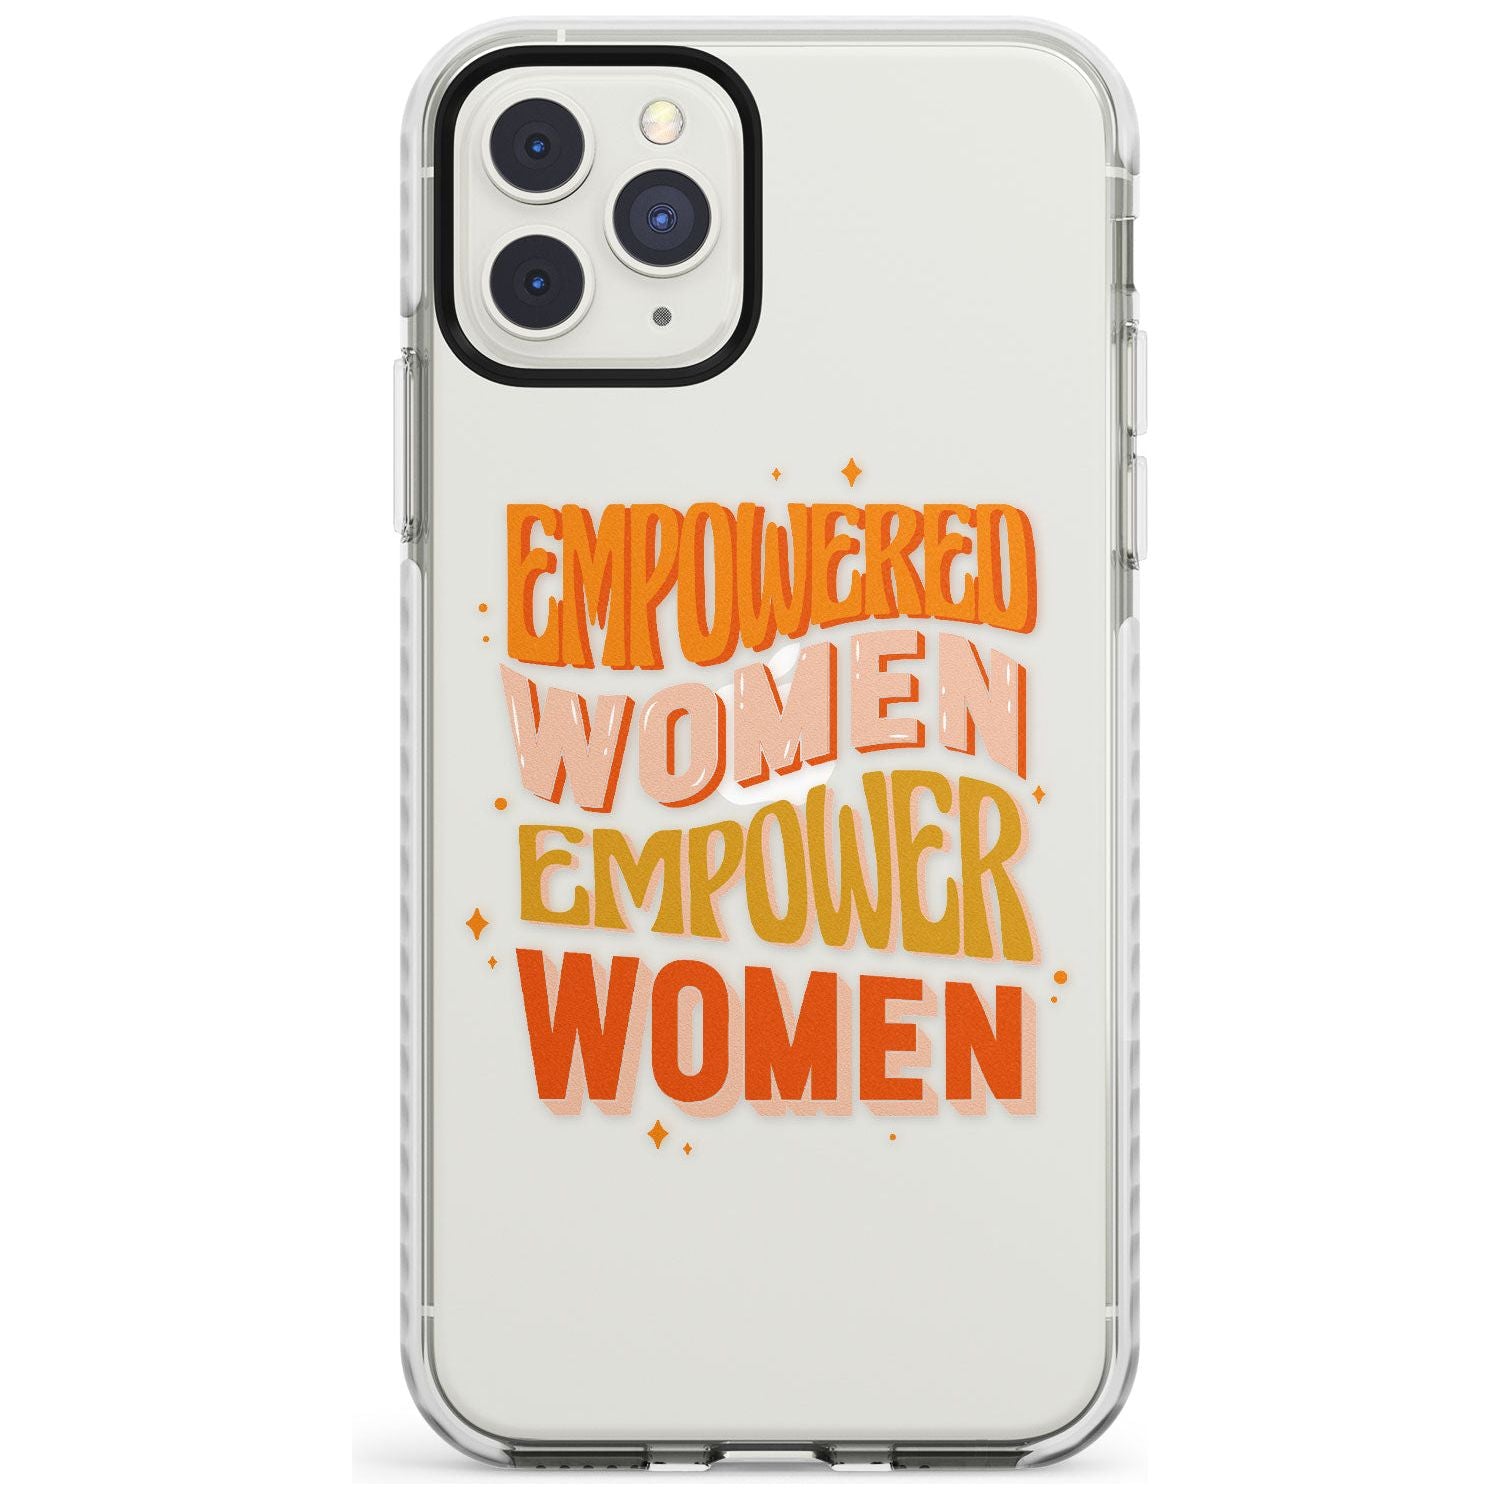 Empowered Women Impact Phone Case for iPhone 11 Pro Max